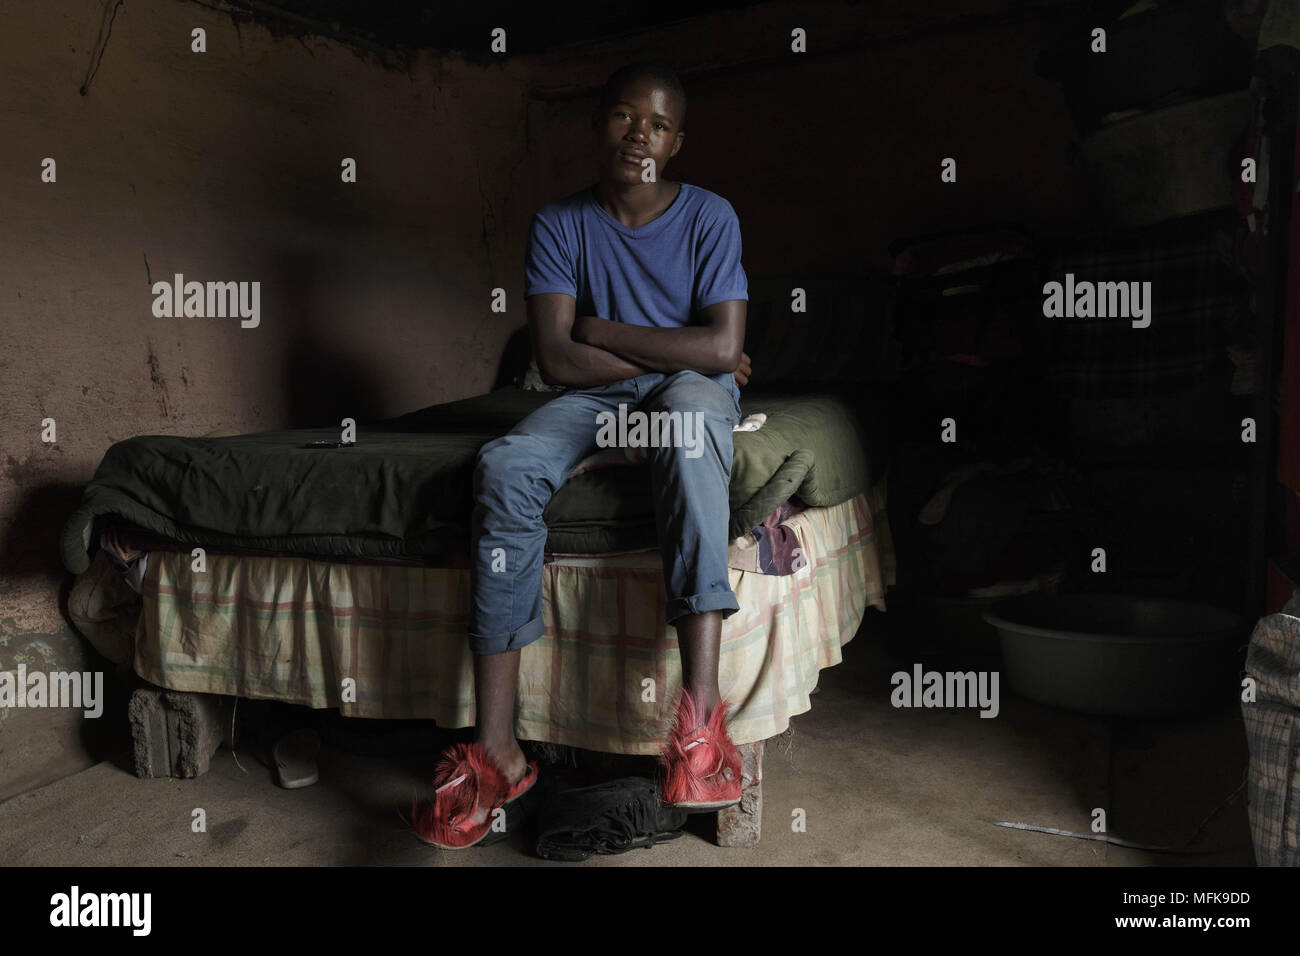 January 13, 2018 - Matatiele, Eastern Cape, South Africa - Thebo, 20, sits on his bed in his mud house. He dropped out of school and sells cannabis. He says: 'My friends who finished school are all without a job, or they have left to Johannesburg' (Credit Image: © Stefan Kleinowitz via ZUMA Wire) Stock Photo